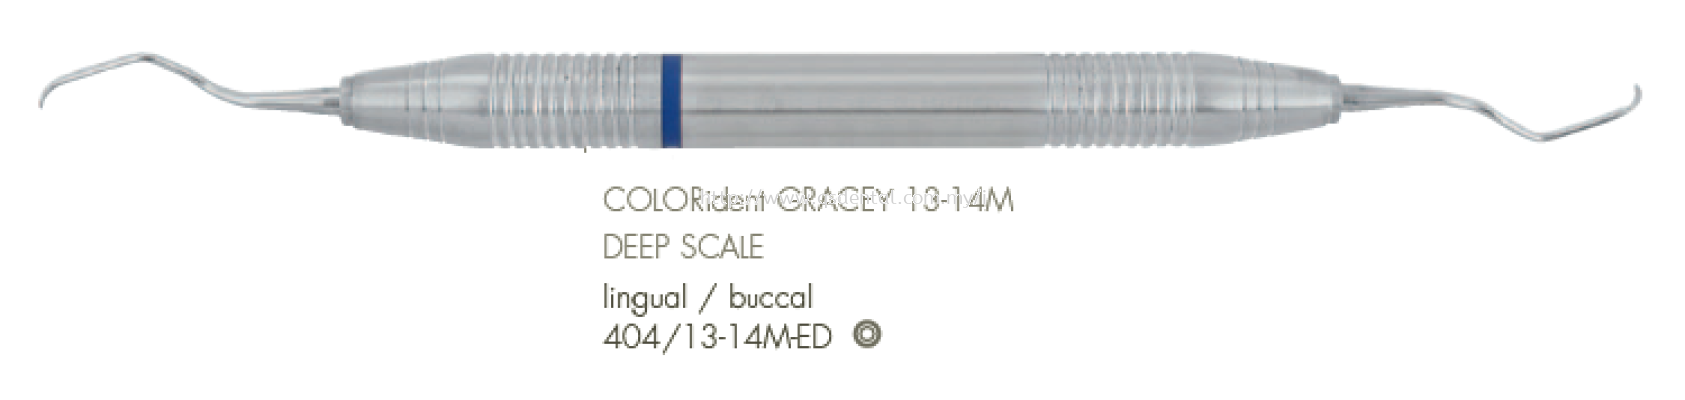 404/13-14M-ED 10mm Handle With COLORident Deep Scale Lingual / Buccal No.13-14M Gracey Curettes